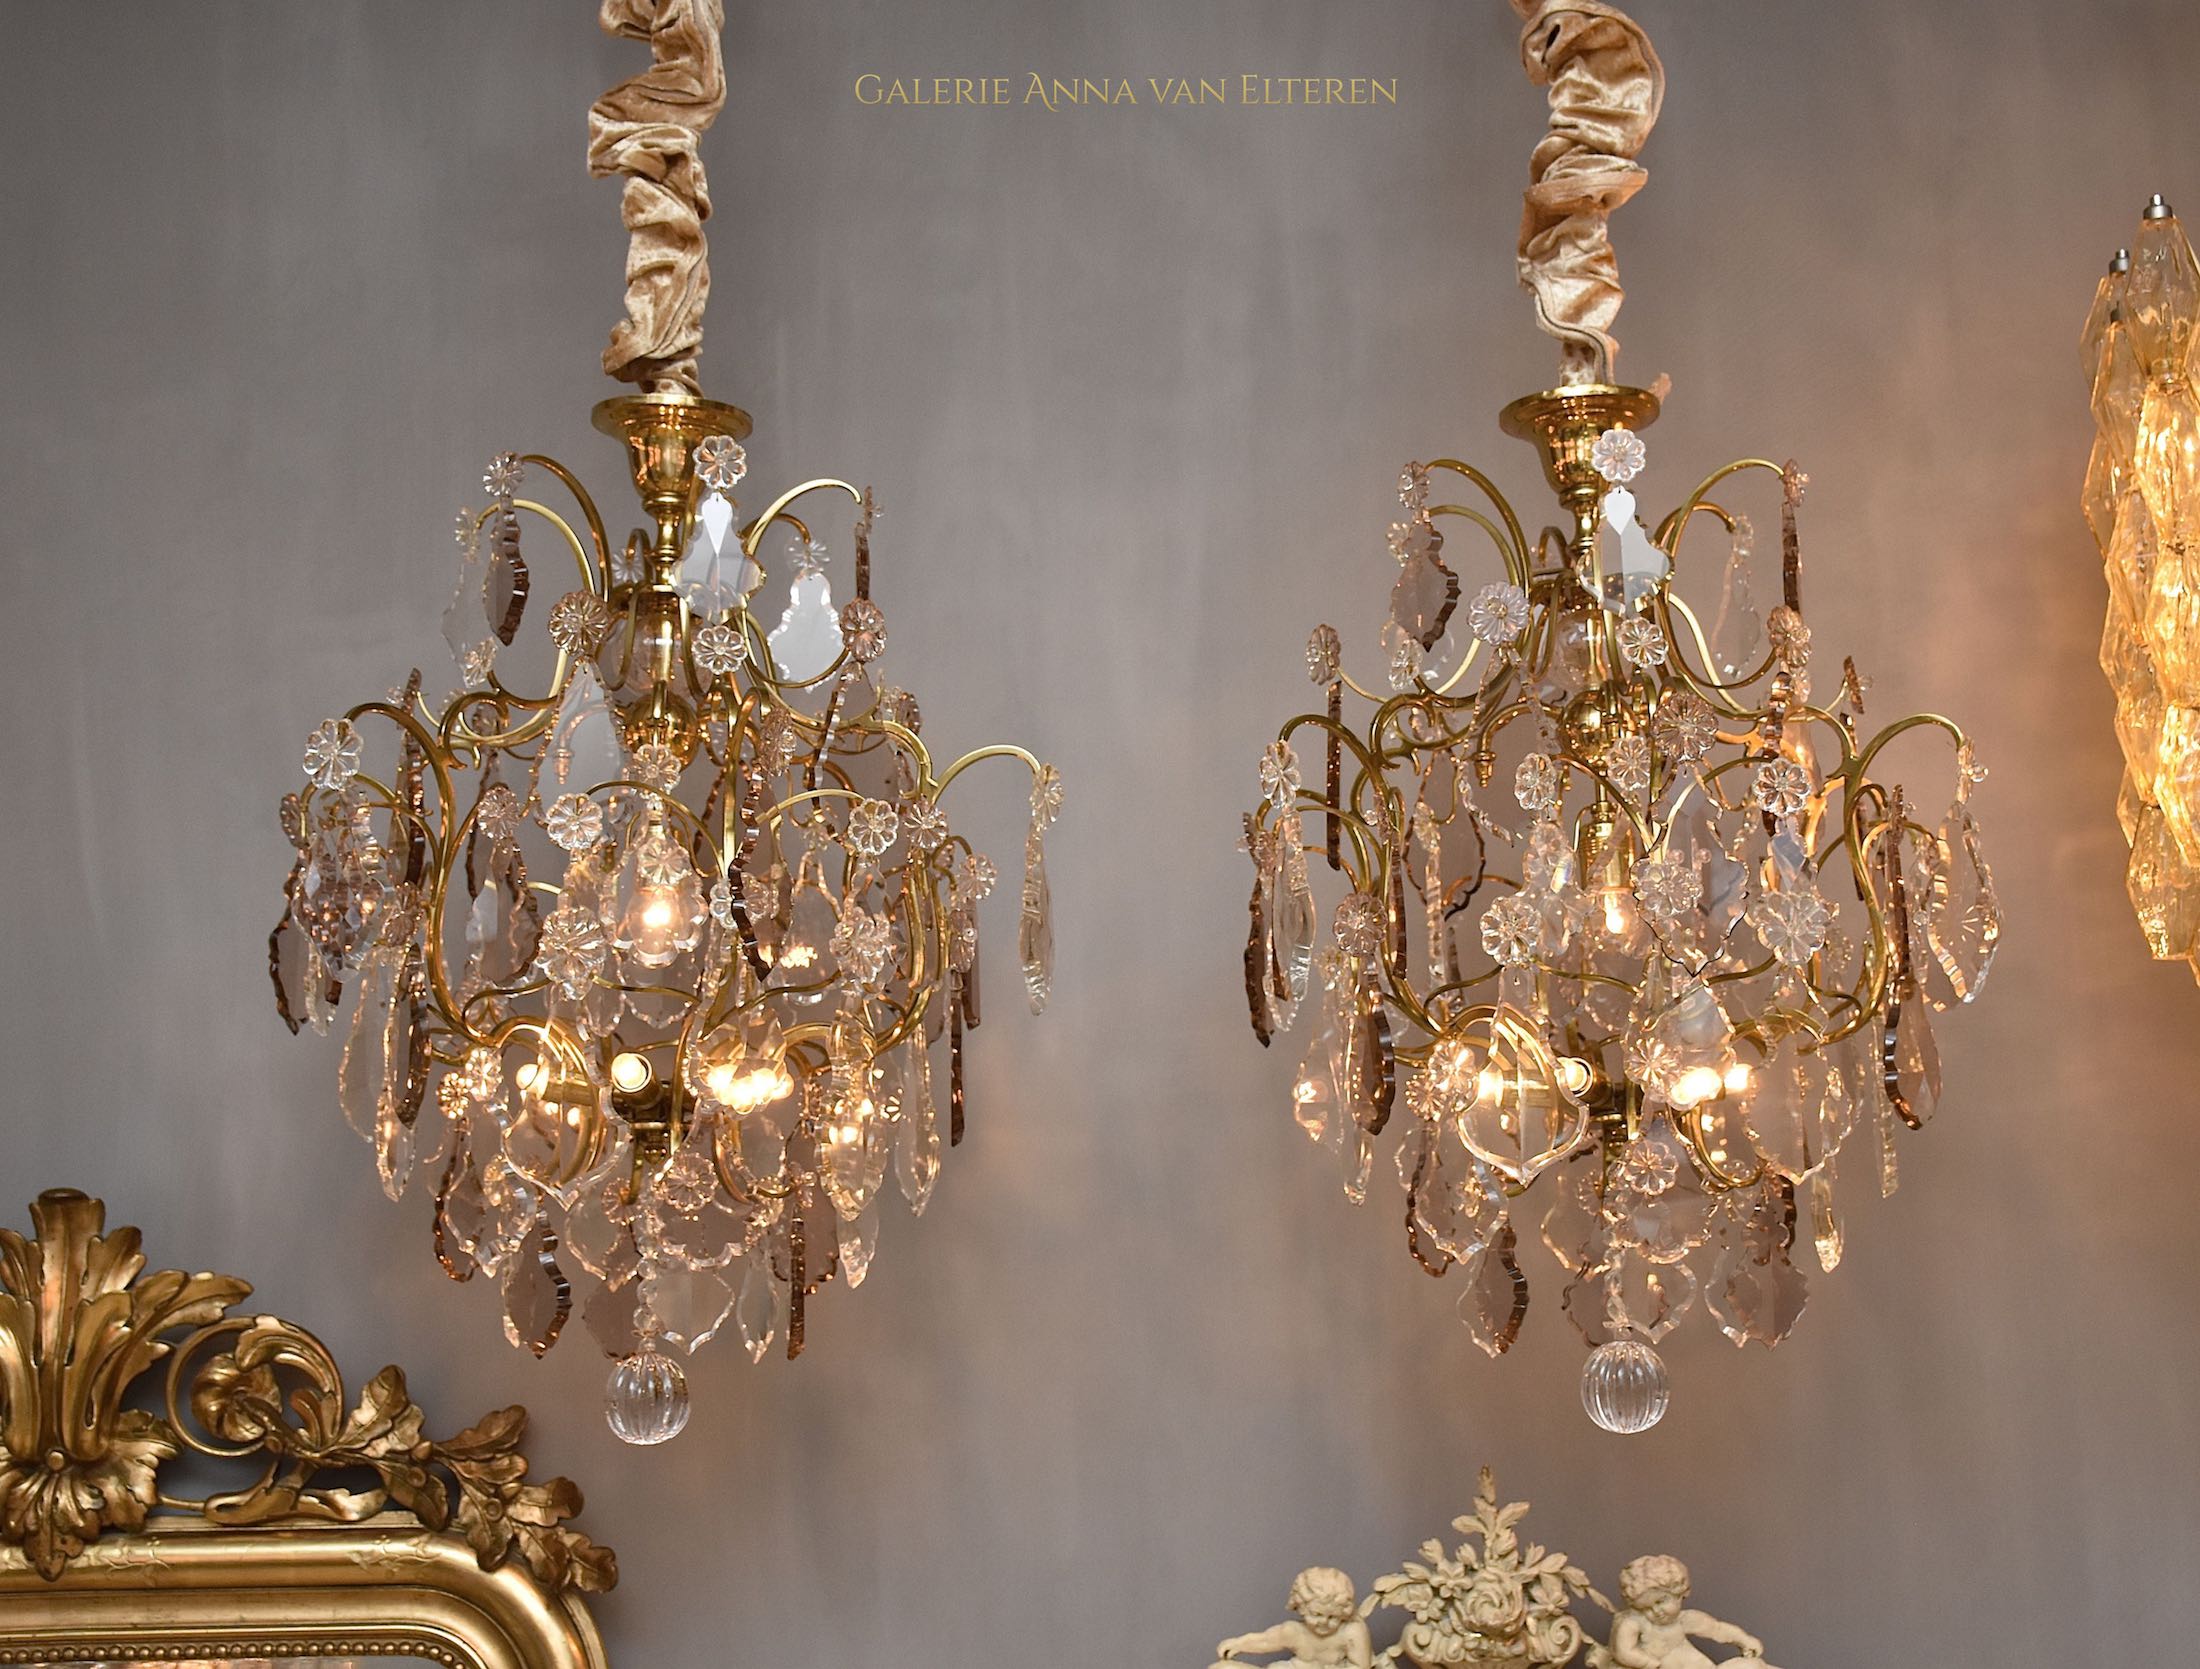 A pair of crystal chandeliers/ lanterns